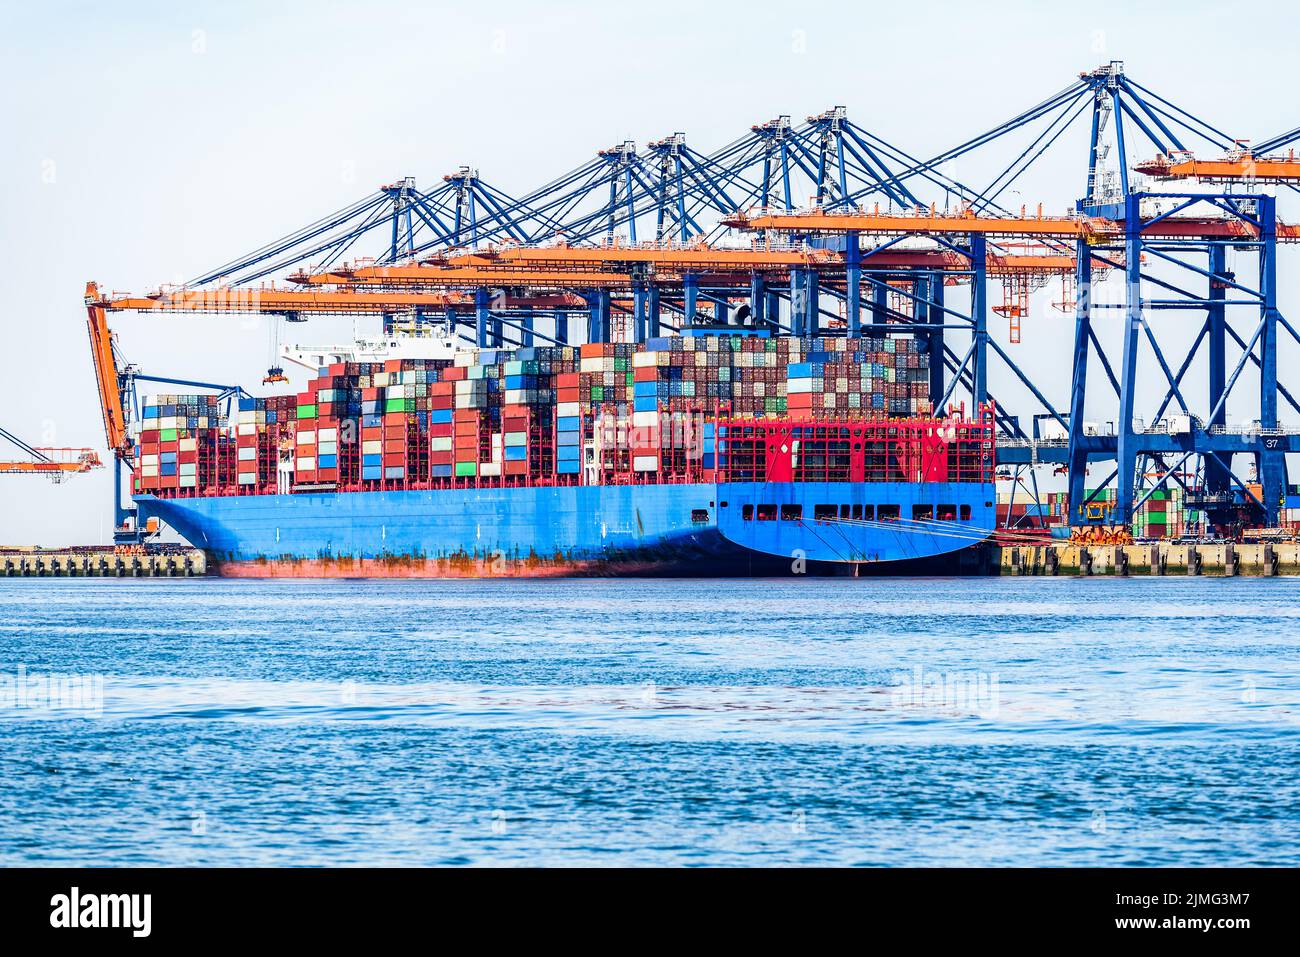 Large container ships being loaded while tied up to a commercial dock with tall gantry cranes on a clear summer day Stock Photo